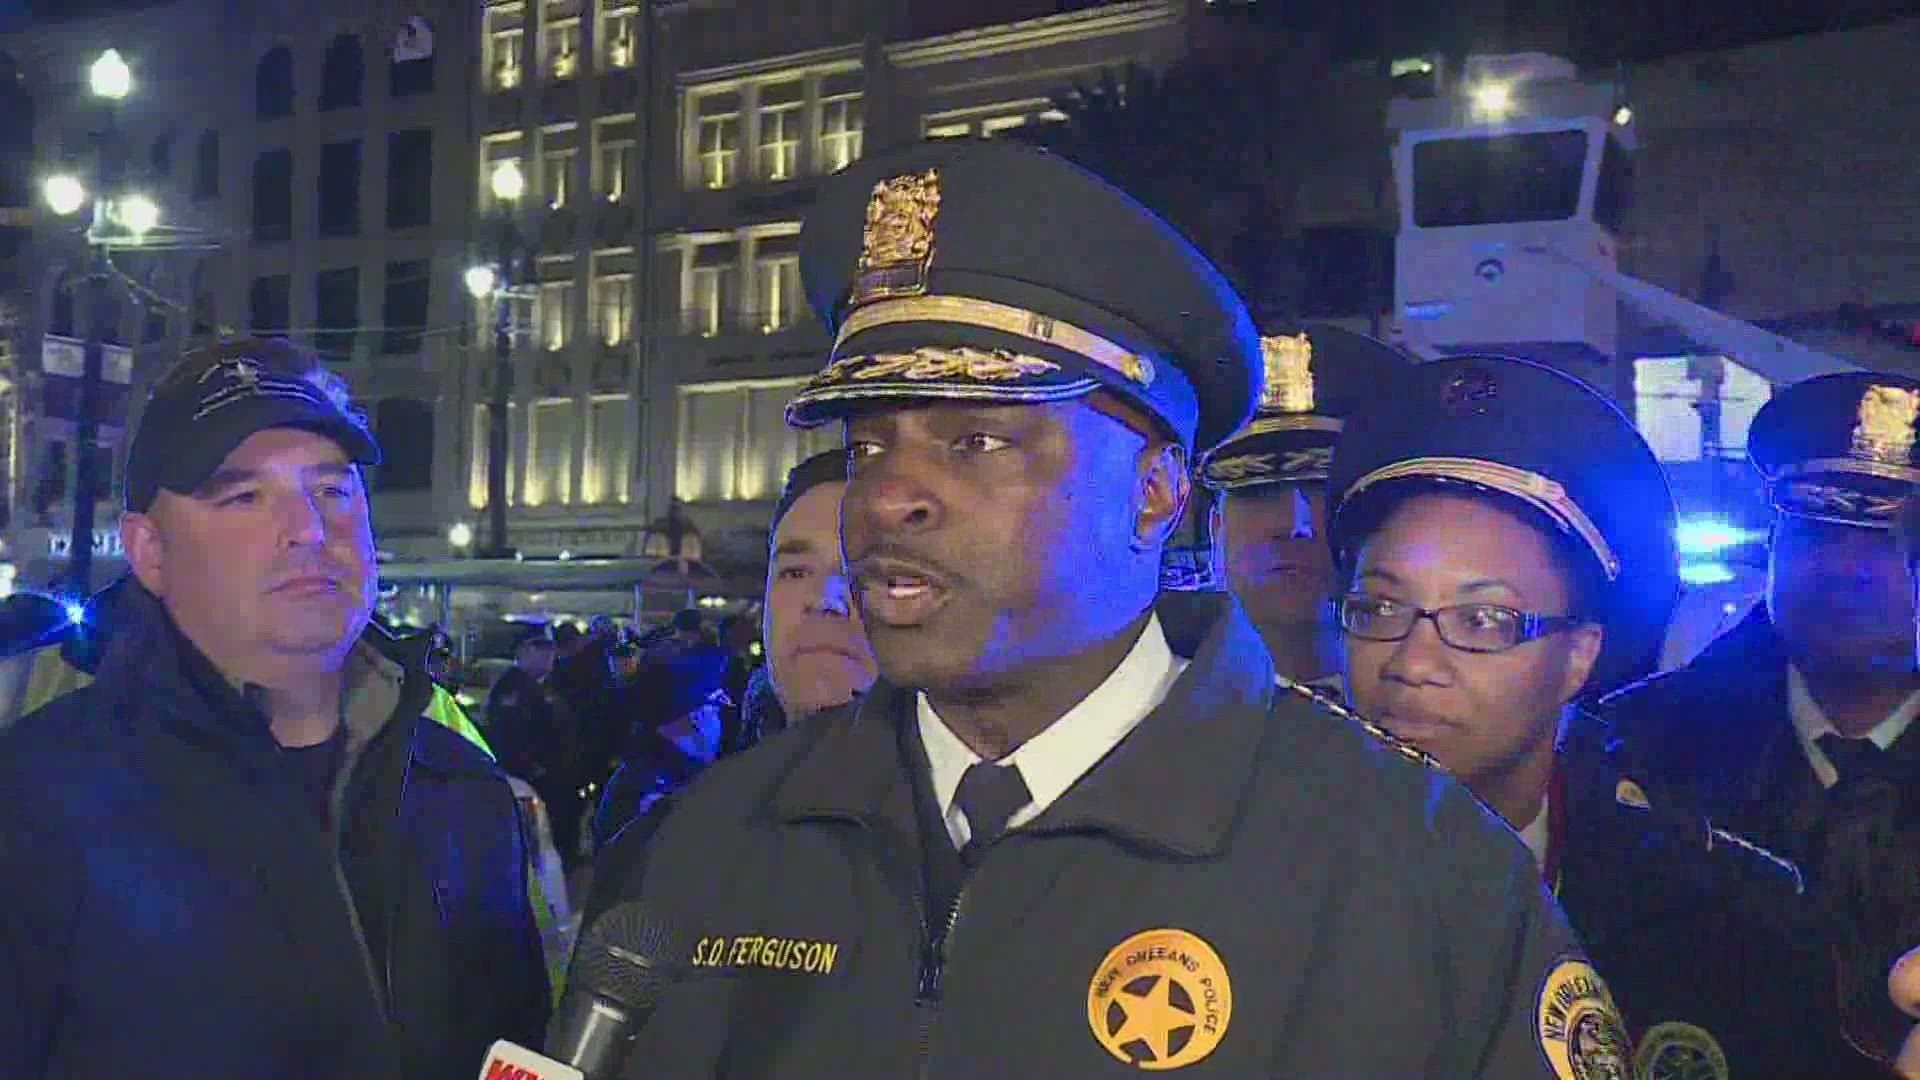 Ferguson is retiring after 24 years with the NOPD, the last 4 as top cop. “It’s time to focus on my family,” he said. “It is time to focus on myself.”